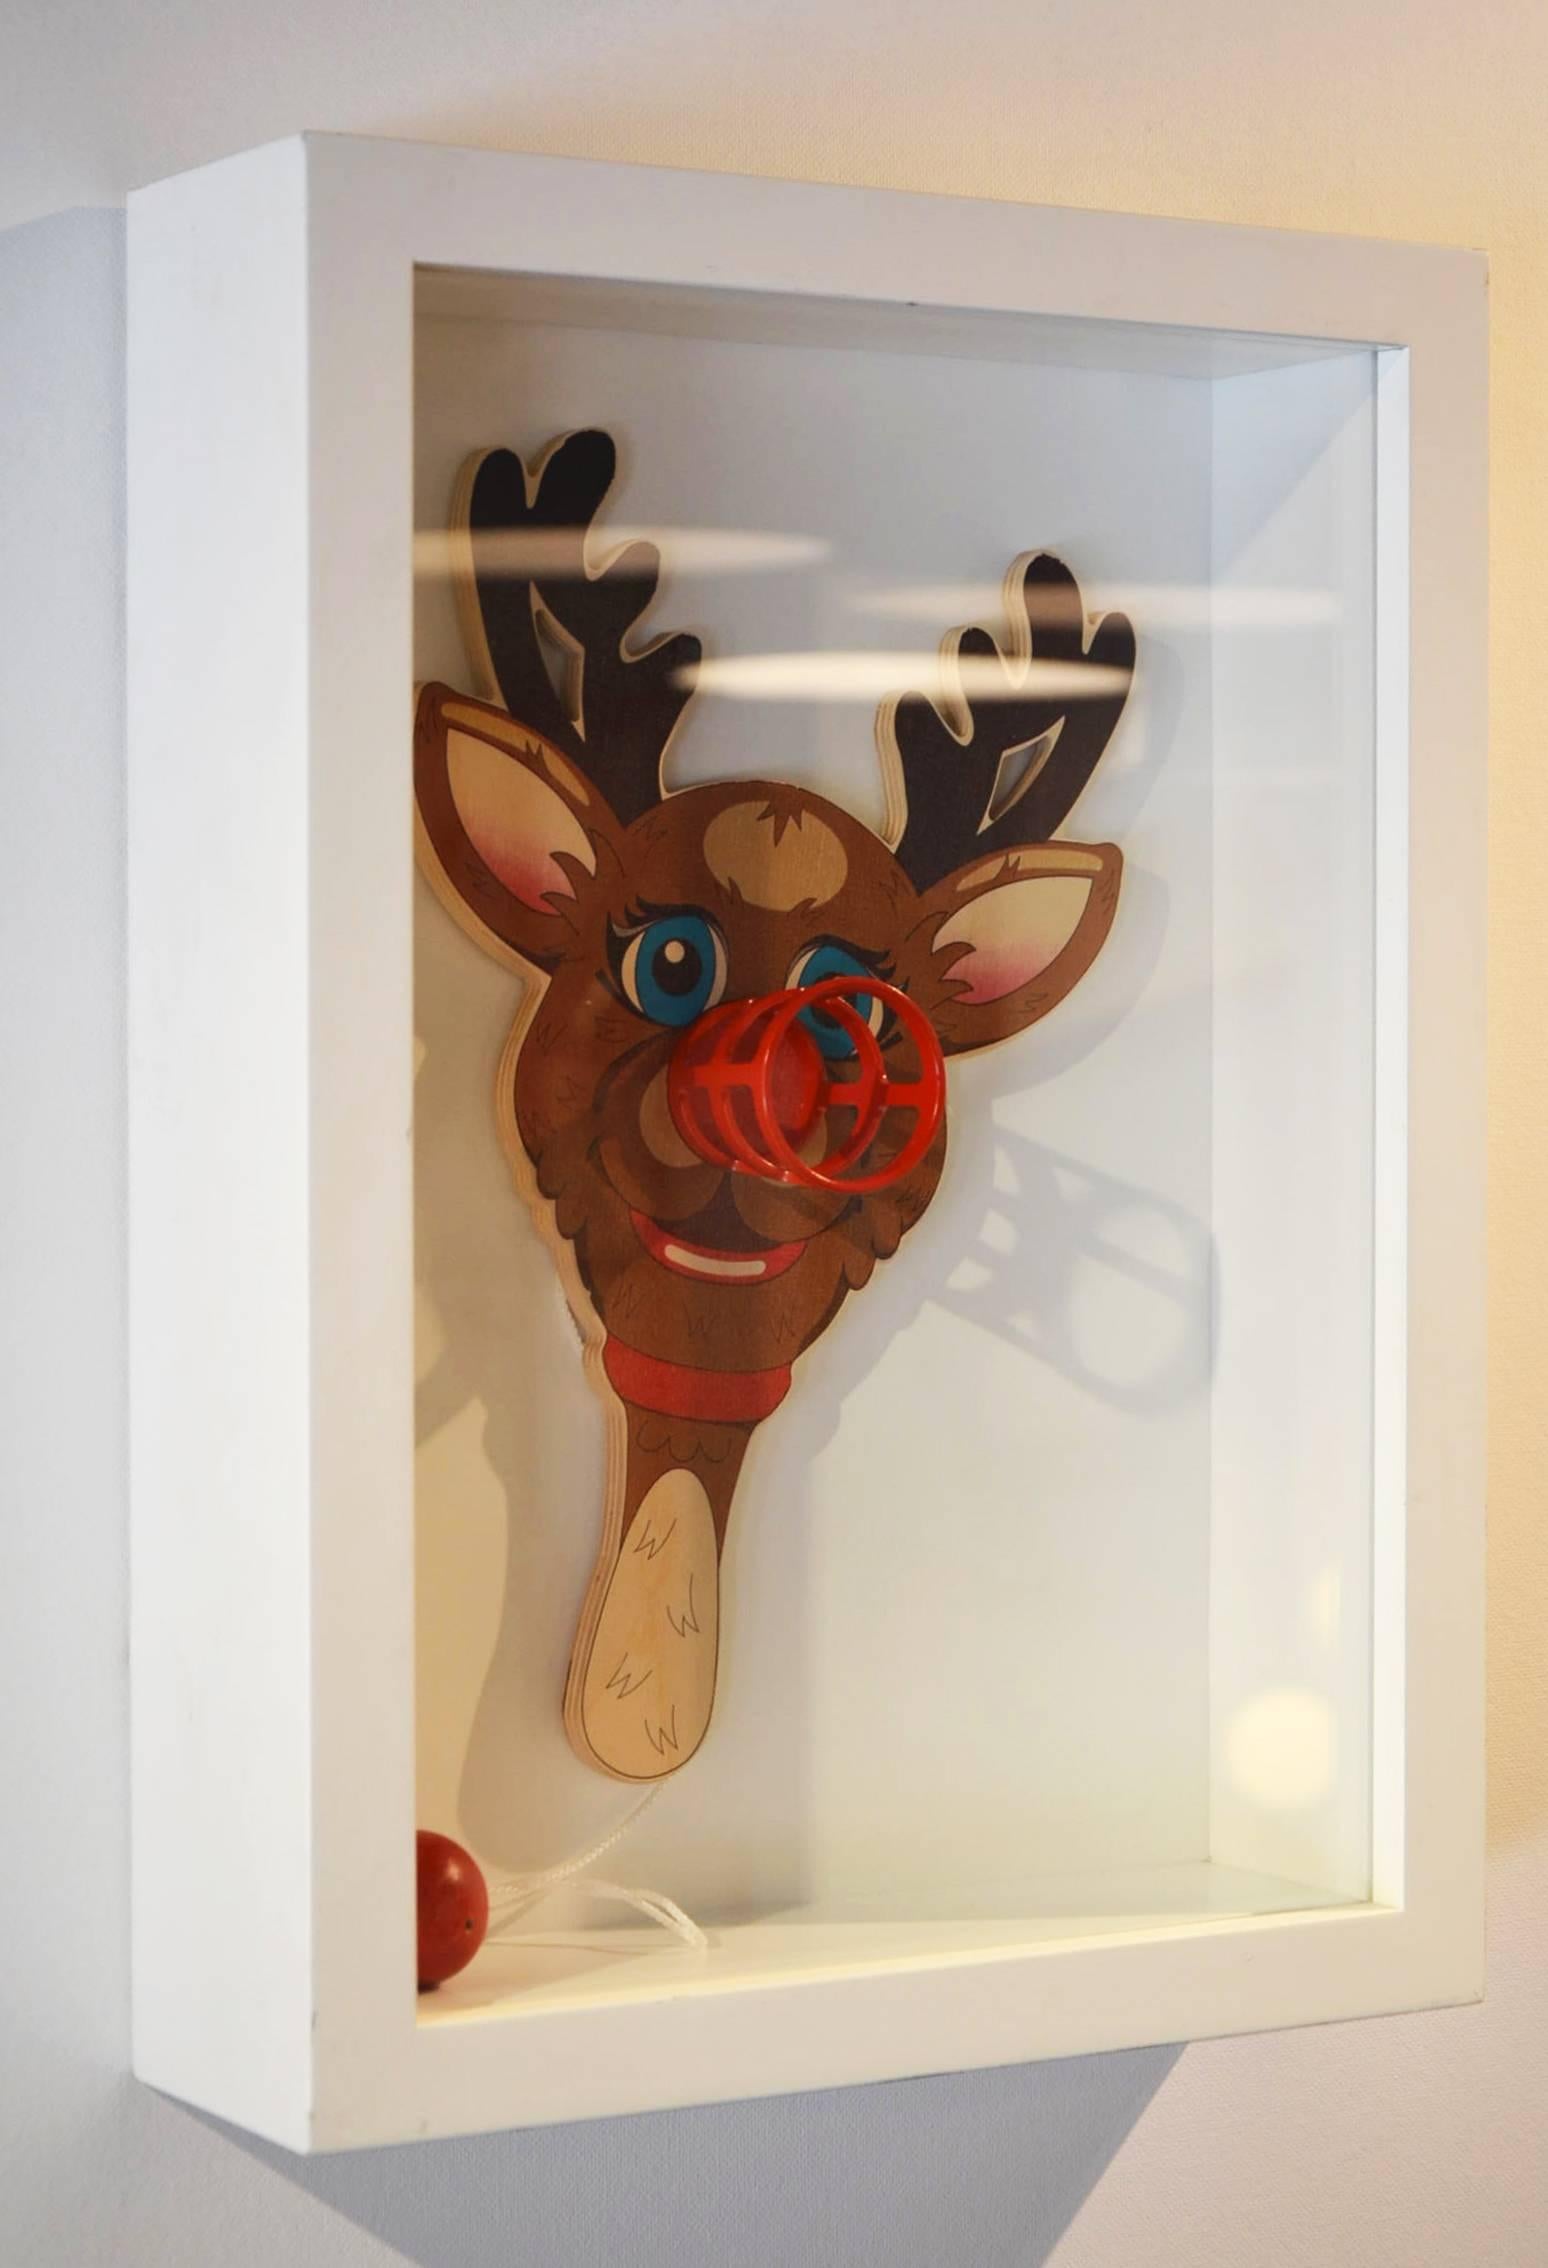 Plumbing the imagery of mass culture with works like this Rudolph the Red-Nosed Reindeer paddle, an edition of 900 created in conjunction with an exhibition at the Deutsche Guggenheim in 2000painted wood, plastic, metal and string.
Measures: 12 1/4